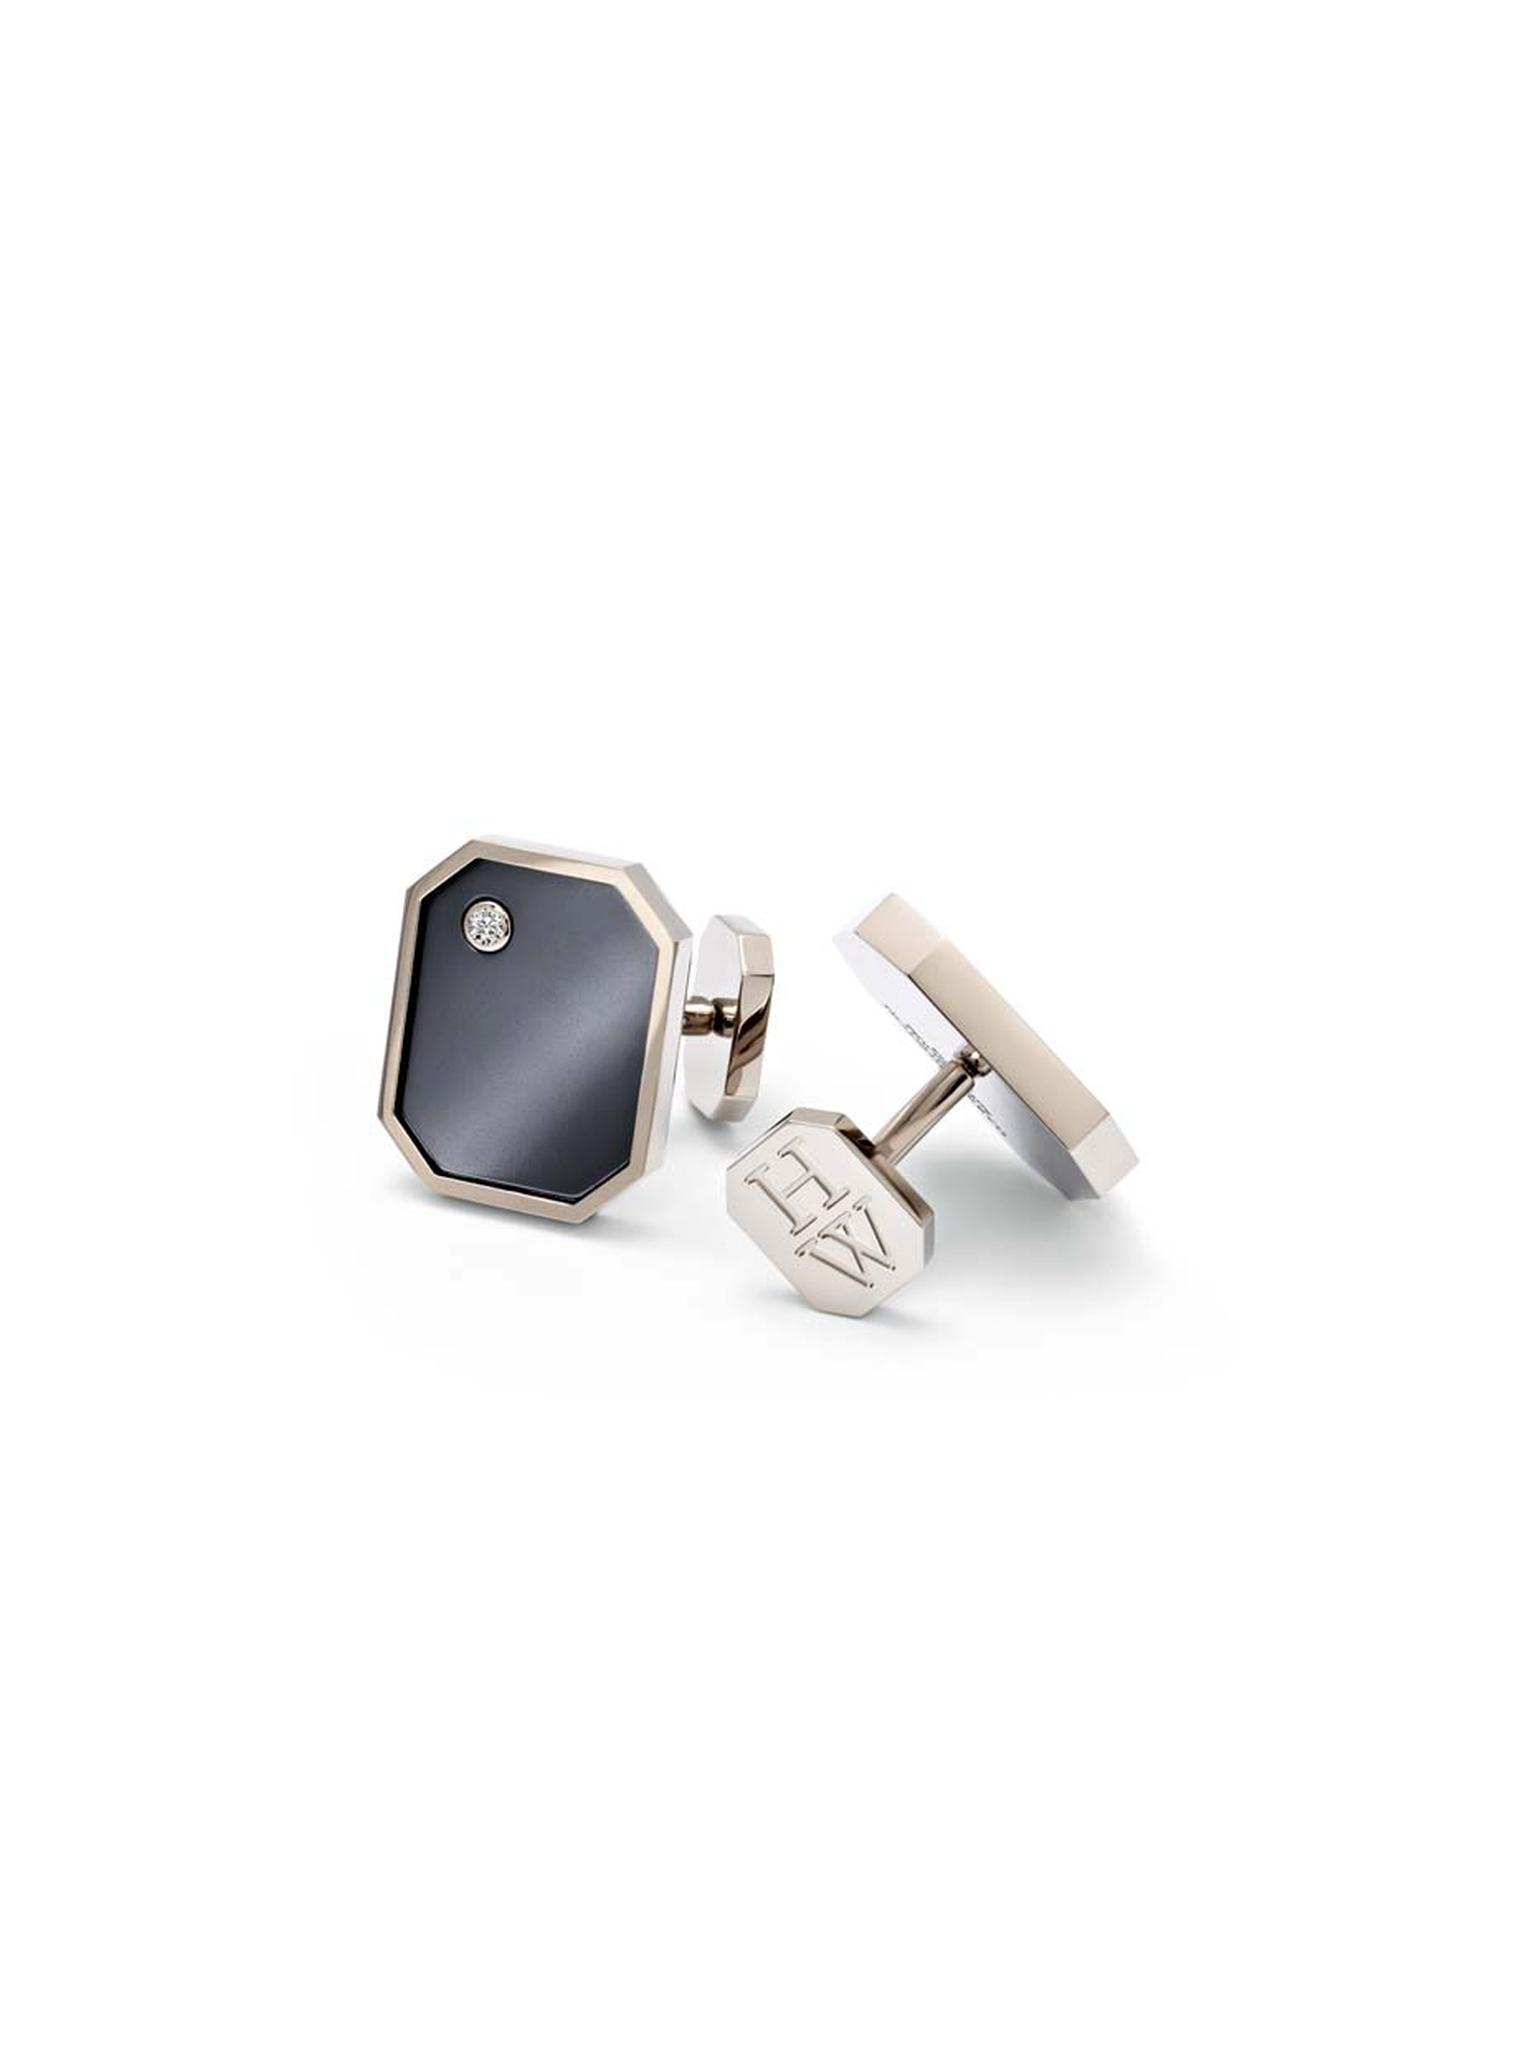 Harry Winston Zalium Collection men's cufflinks form part of a new line of sleek jewelry for men made from the high-tech zirconium-based alloy.